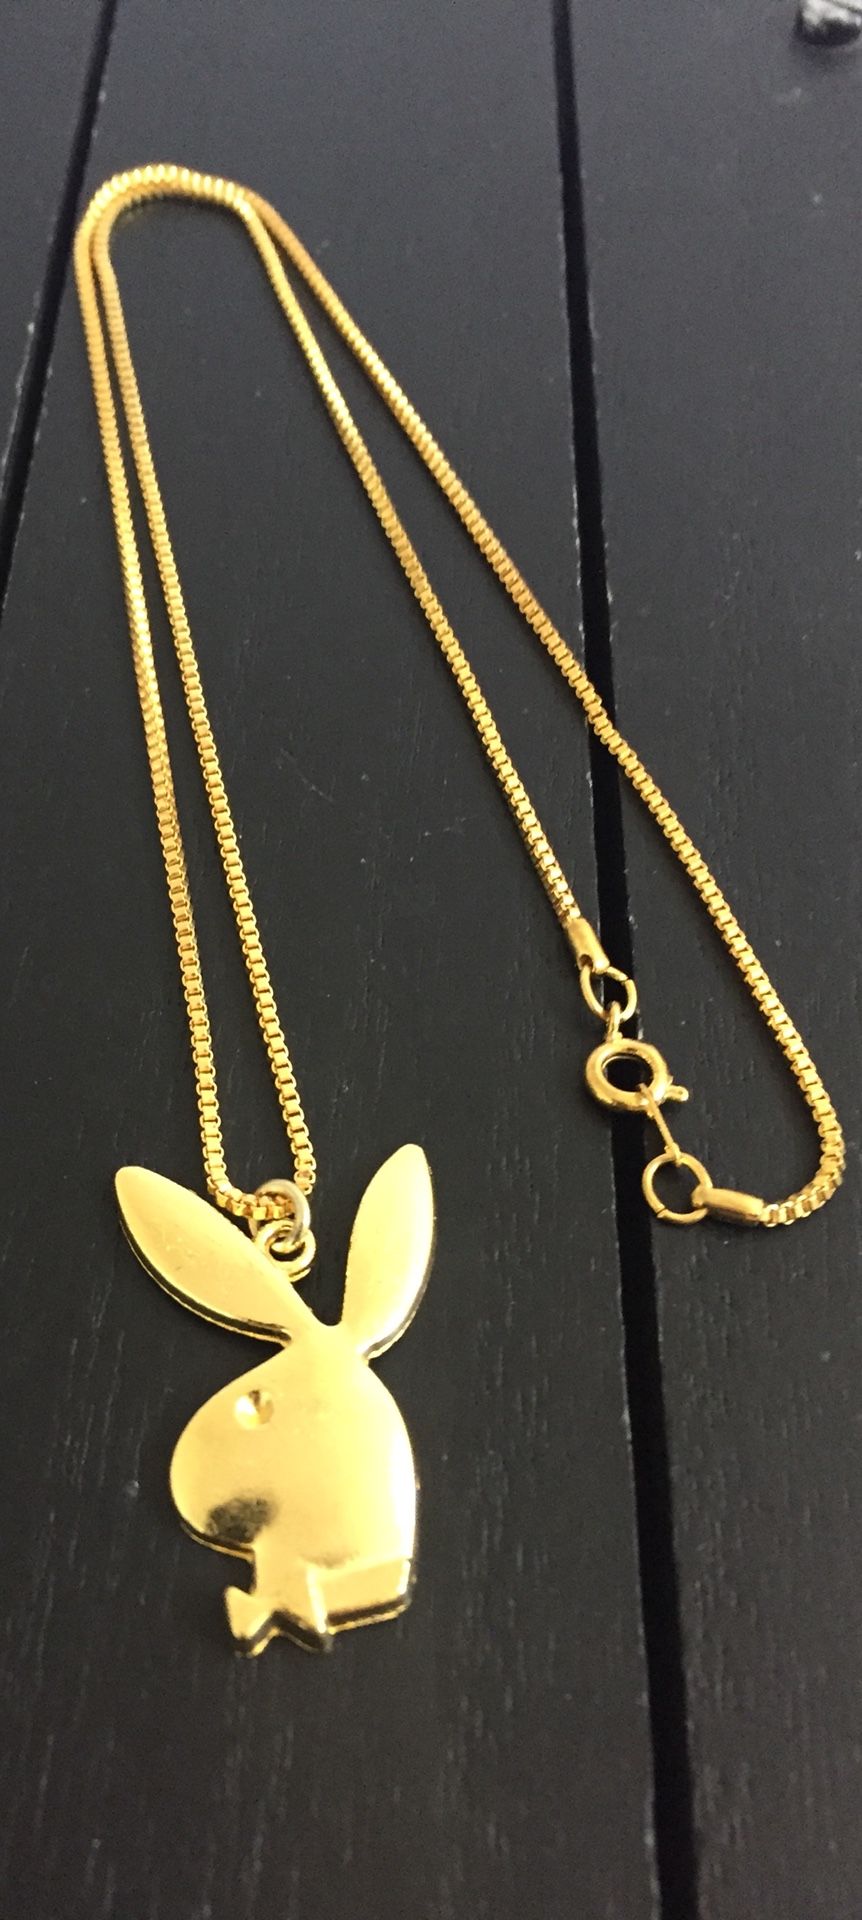 20” 18K Gold Plated Box Chain Necklace with Playboy Bunny Pendant